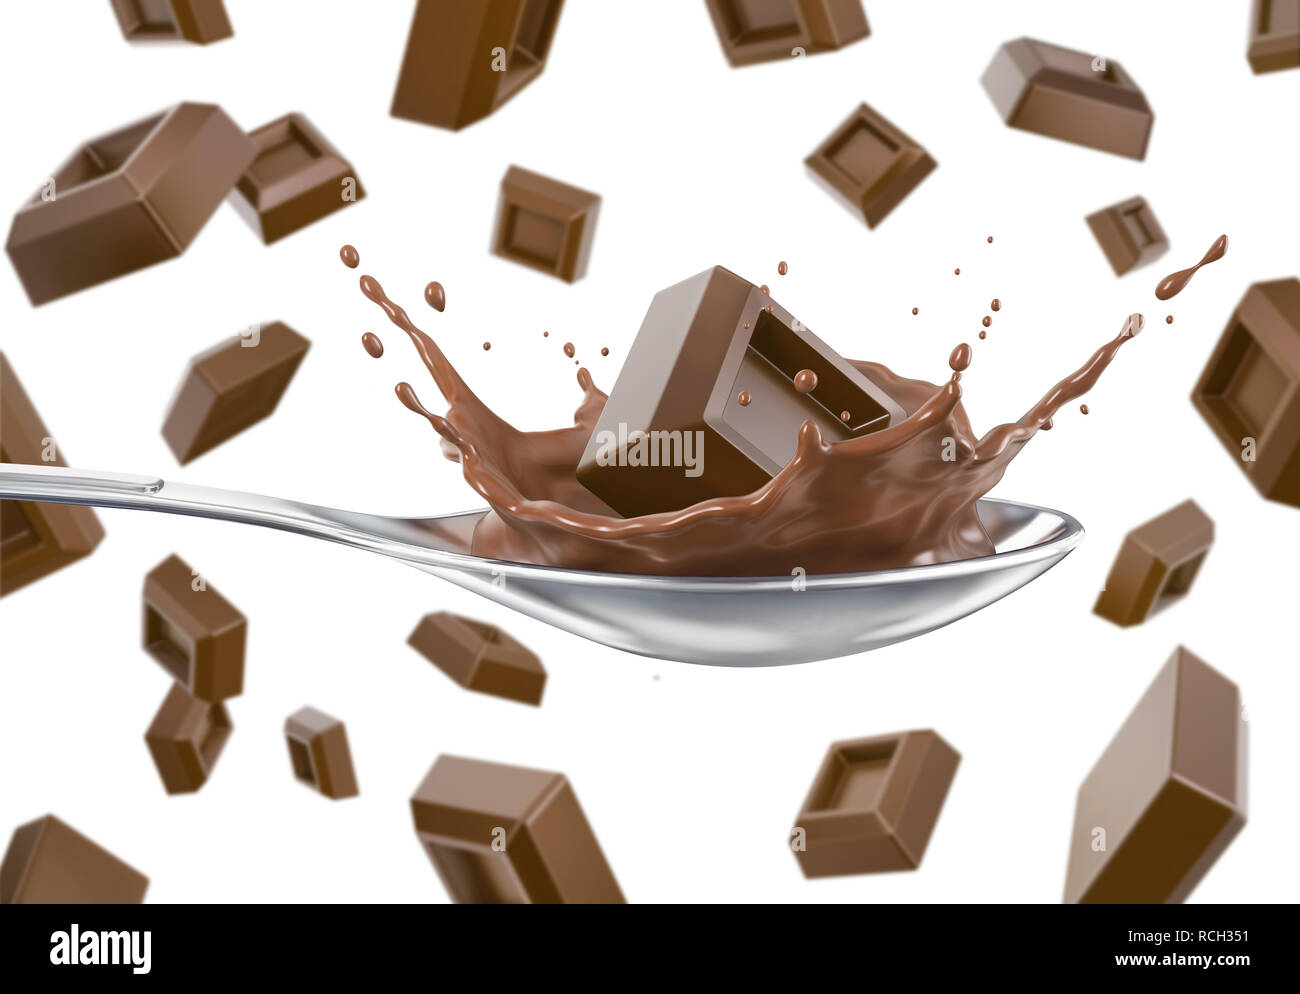 Many chocolate cubes falling down. One splashing in a spoon with liquid chocolate. On white background. Clipping path included. Stock Photo